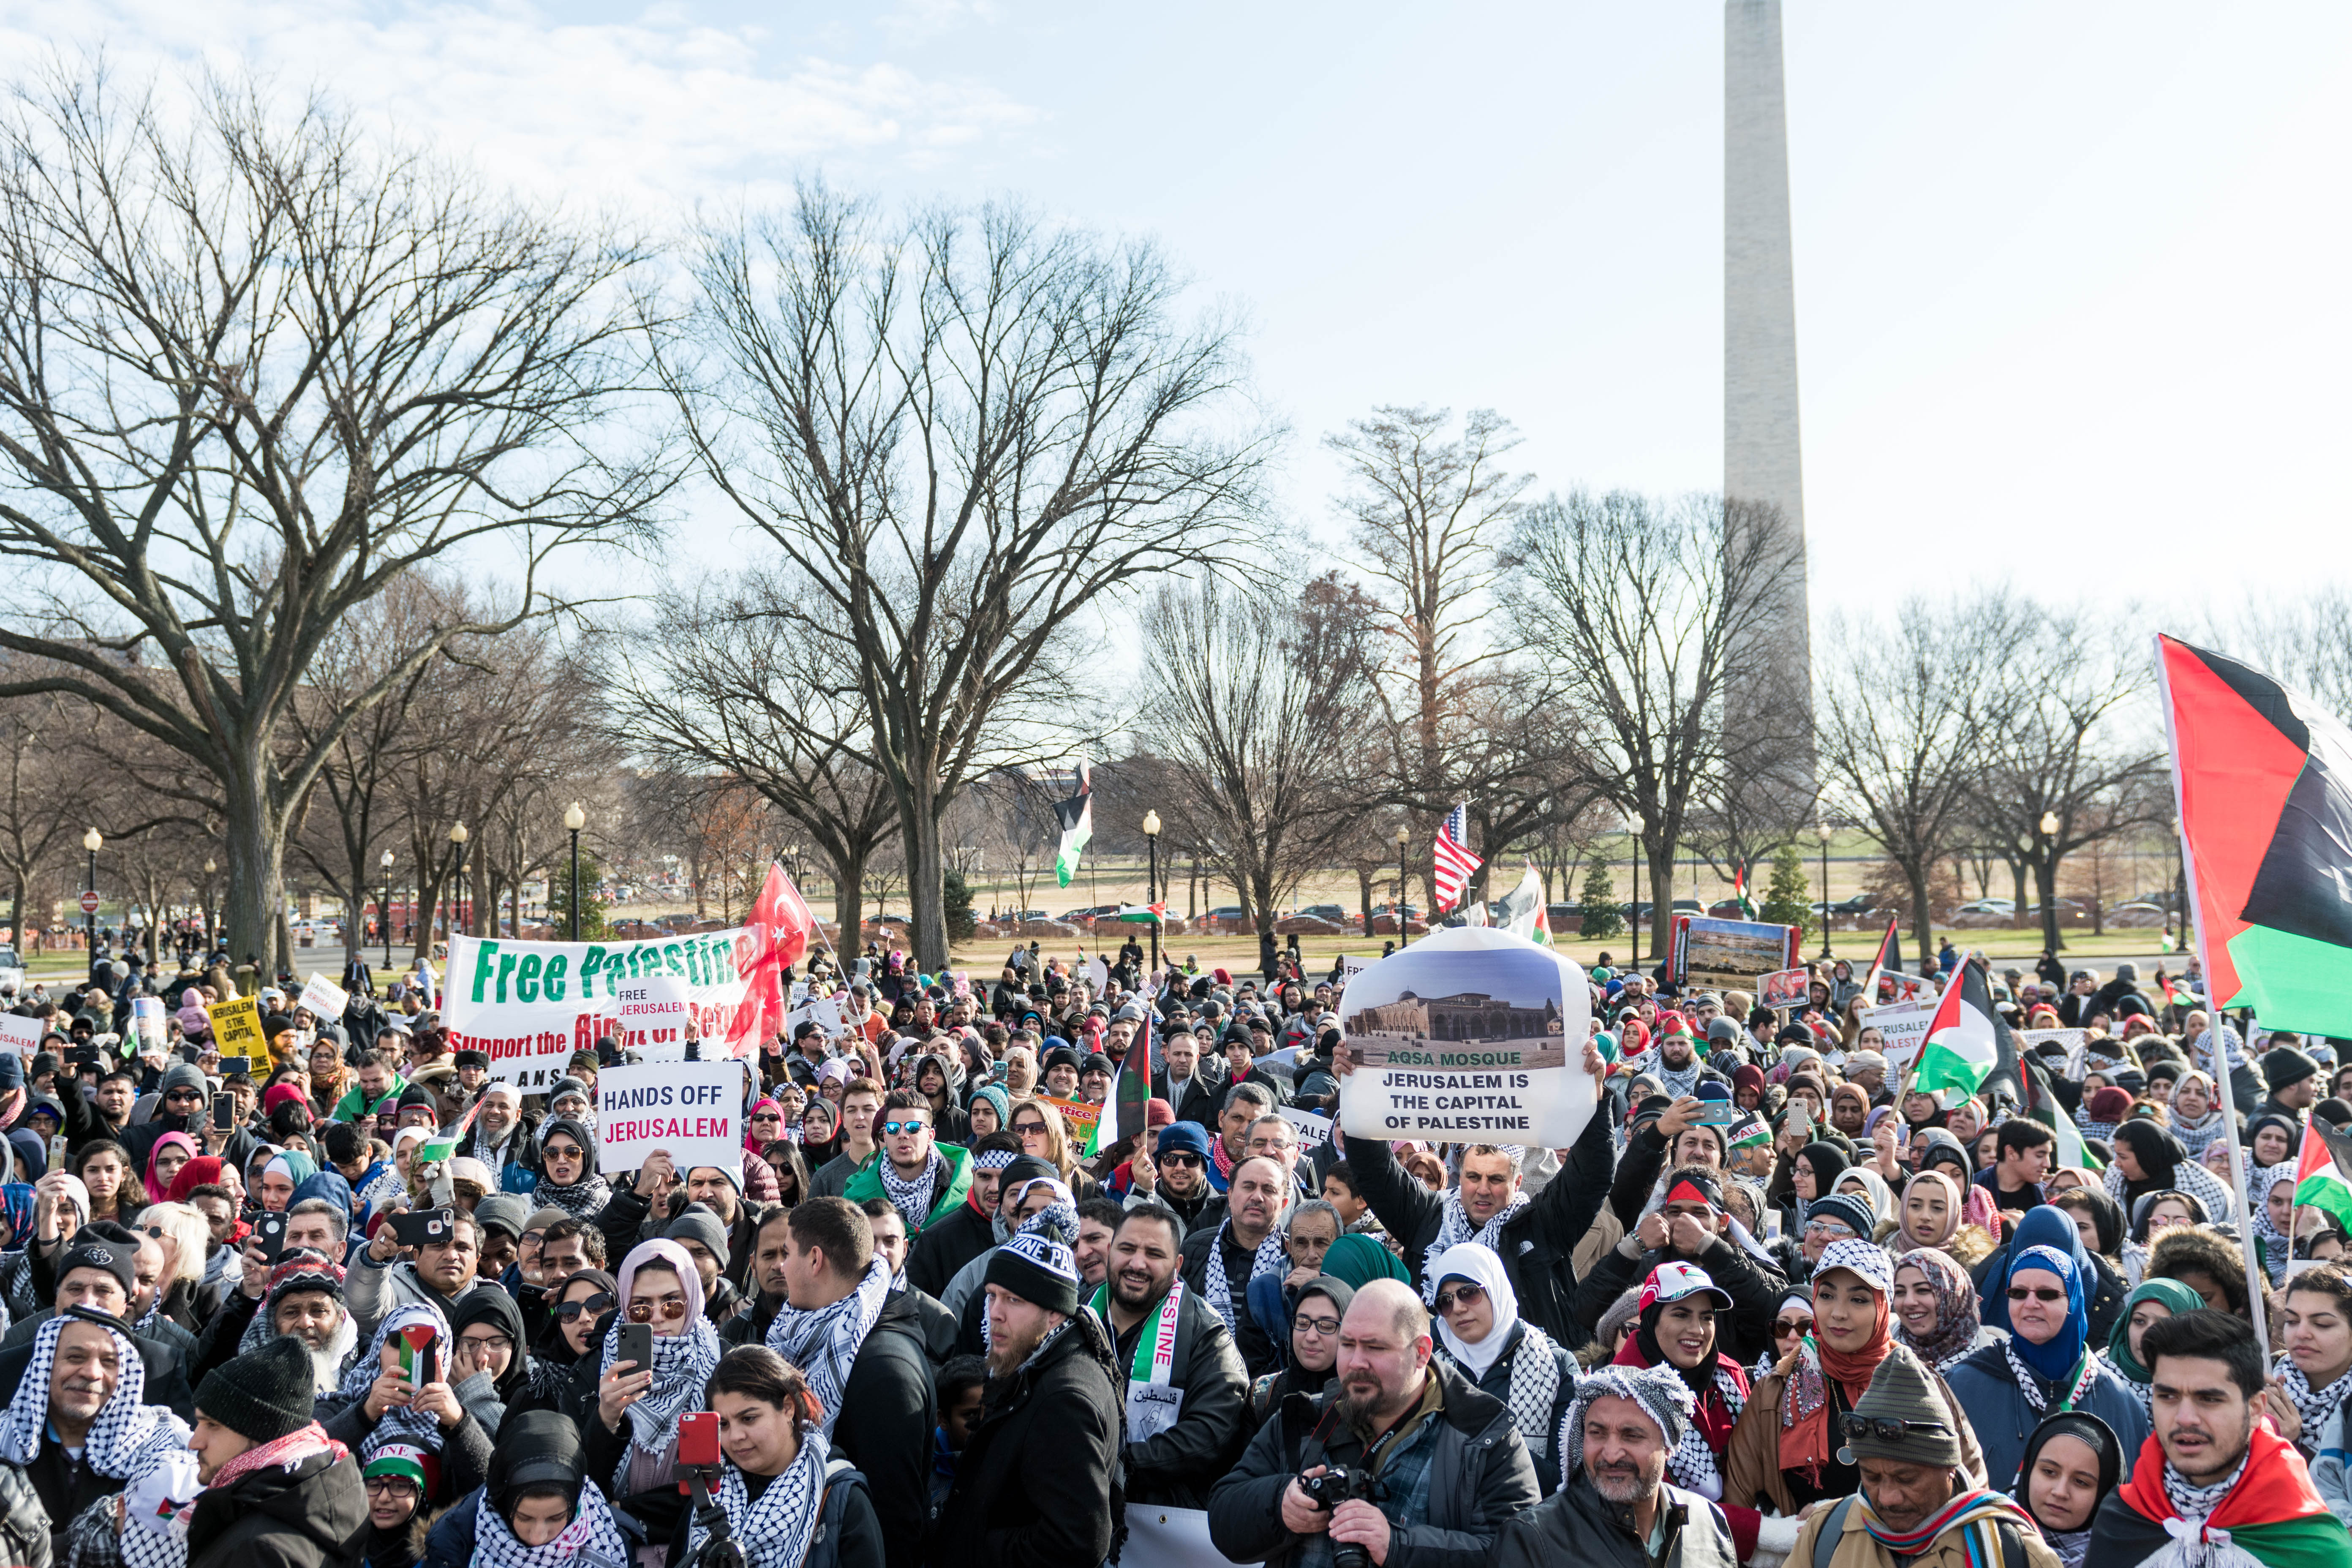 Thousands March for Jerusalem in DC! American Muslims for Palestine